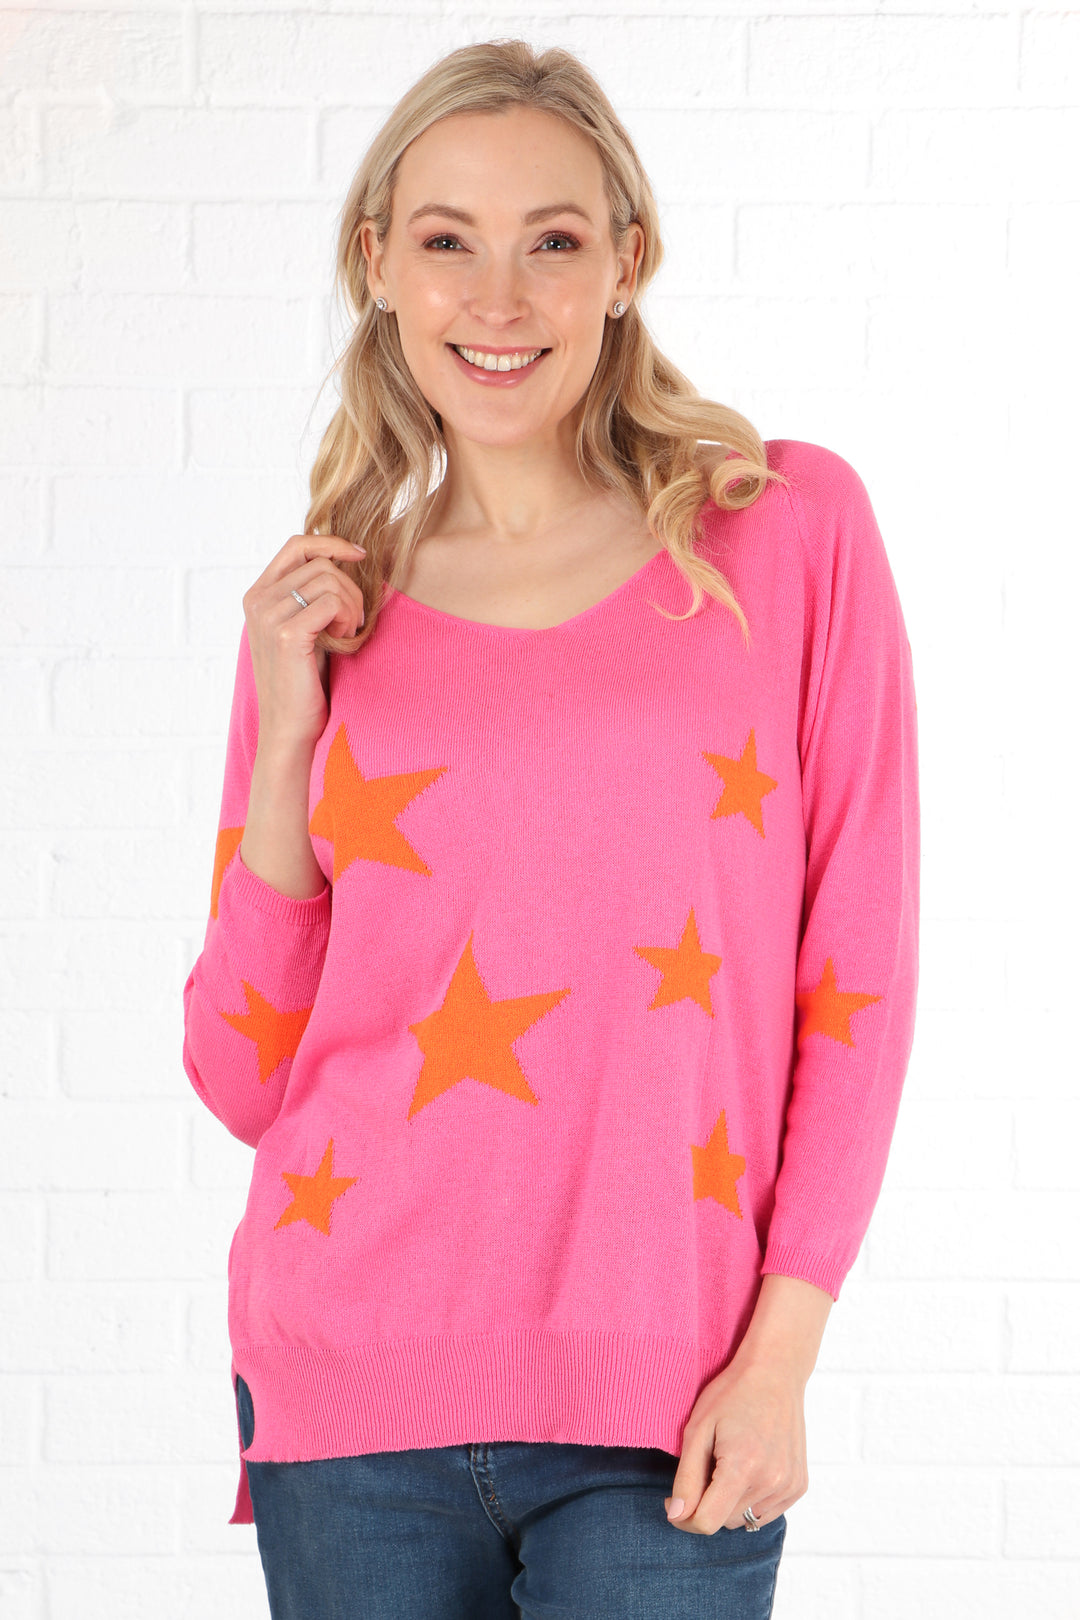 model wearing a pink long sleeve jumper with a scattered orange star print pattern and v neck